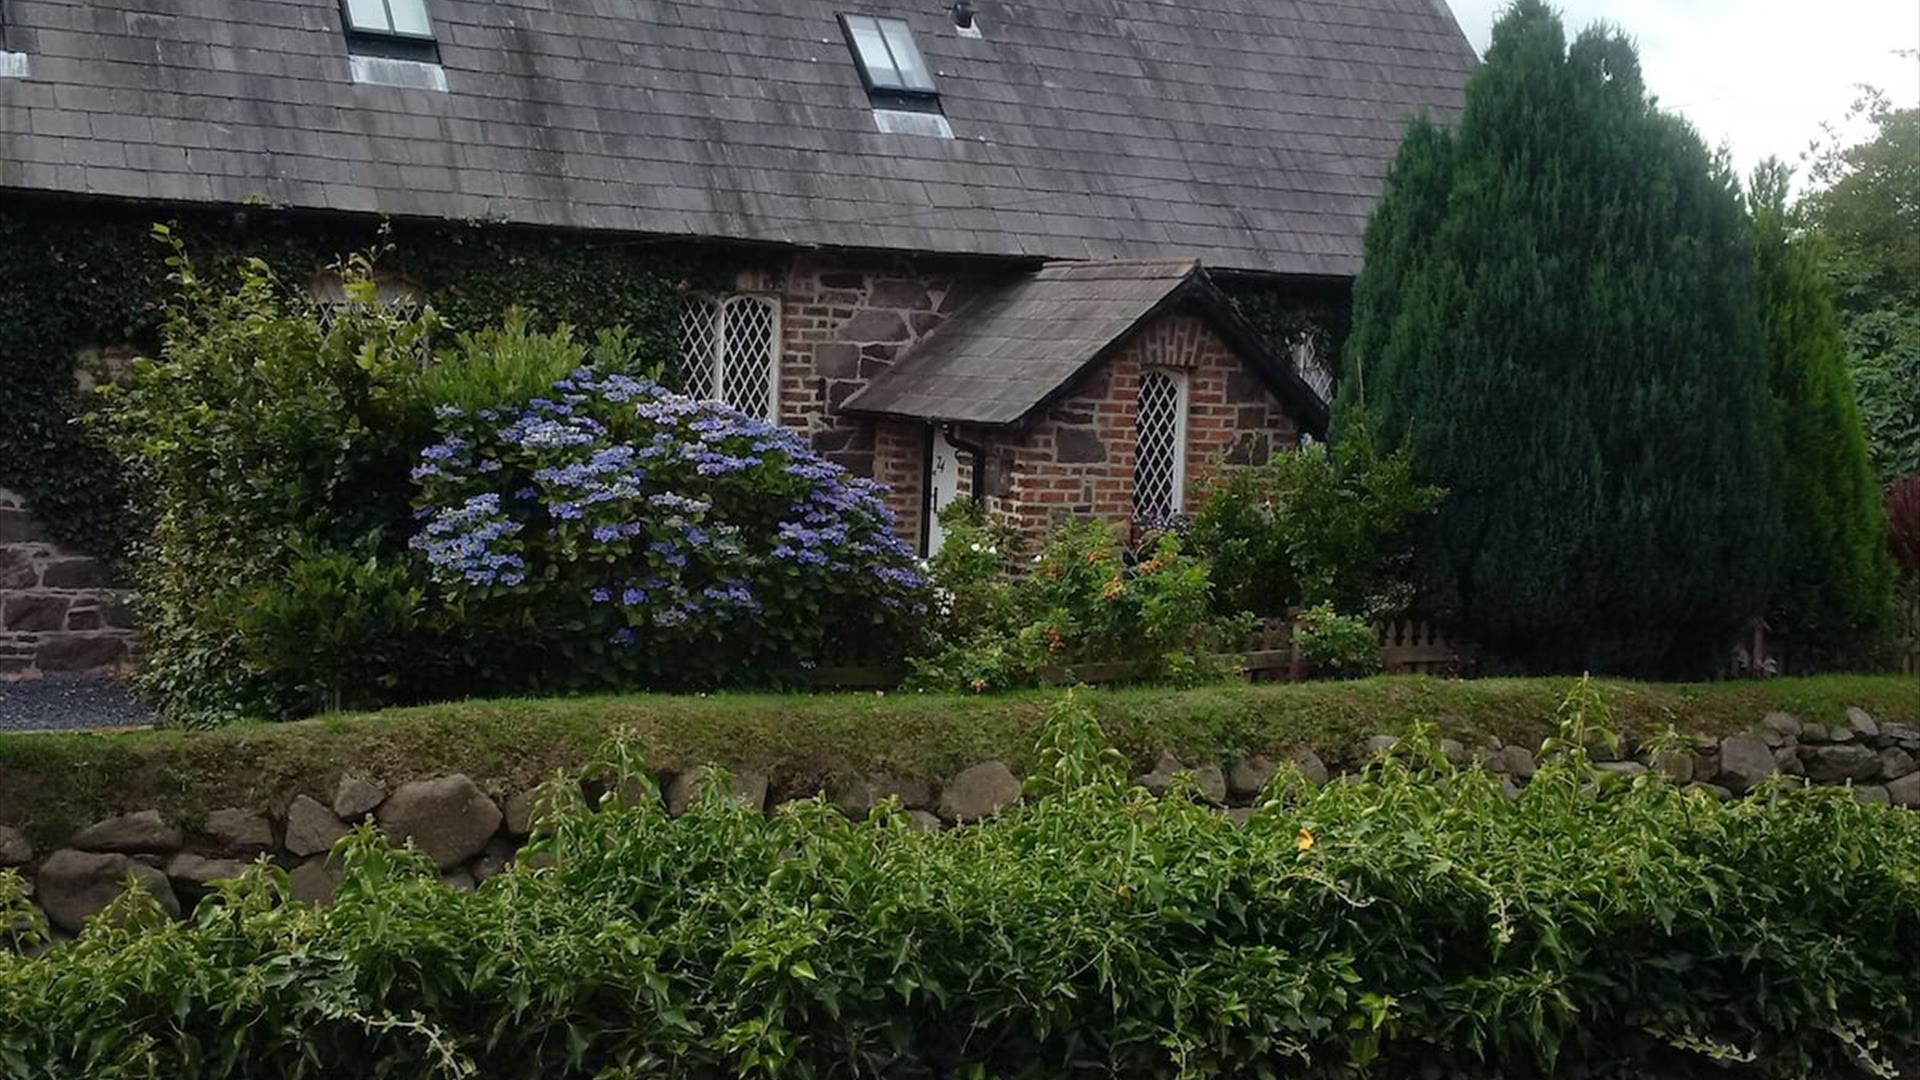 Image is of front of cottage with stone wall covered with plants and flowerbeds